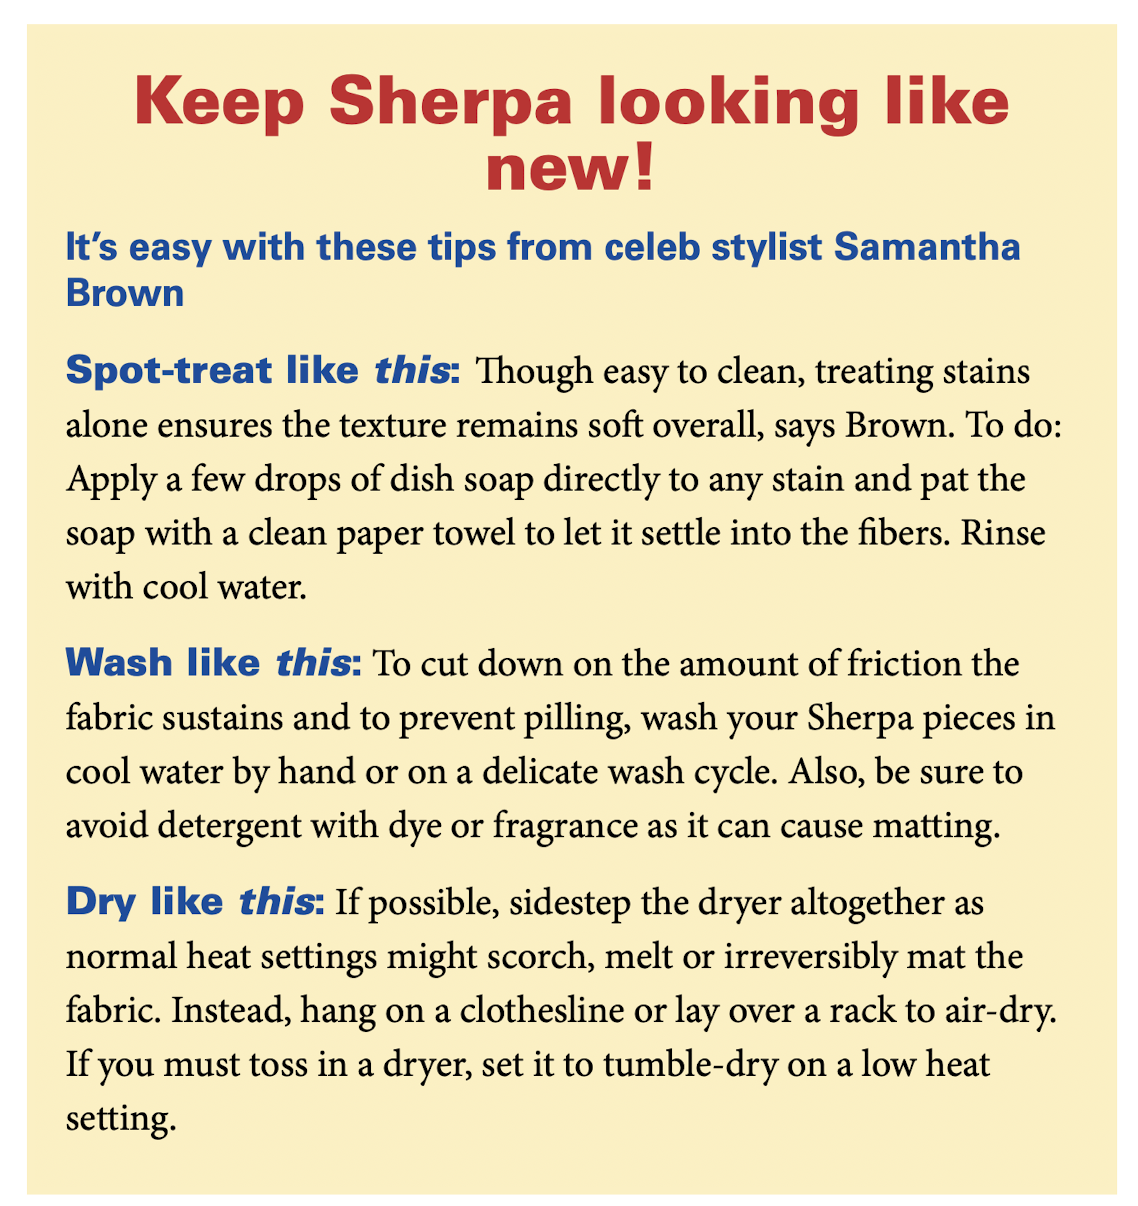 How to take Care of Sherpa